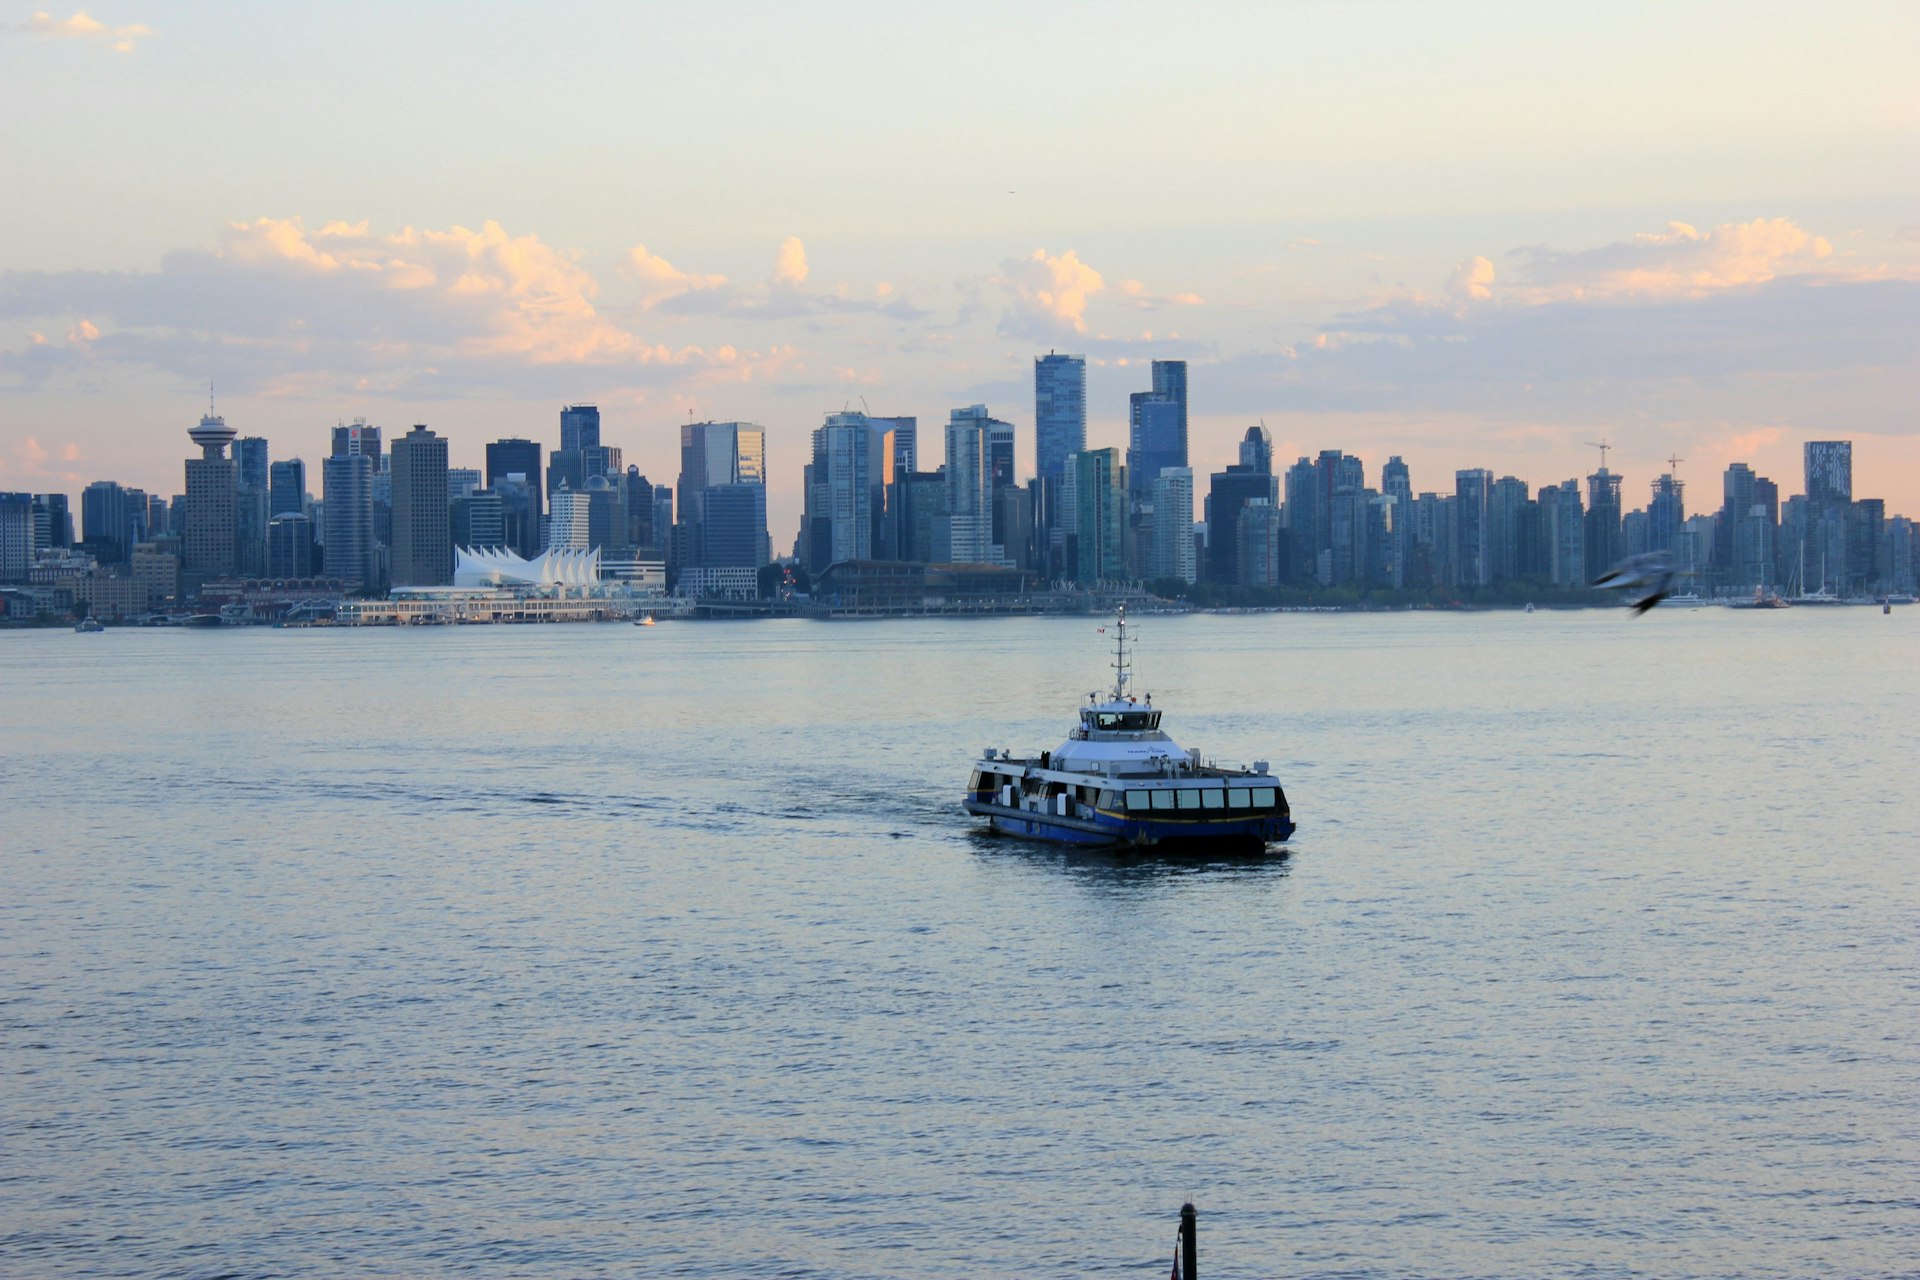 A Seabus ferry on the water against the skyline of downtown Vancouver, British Columbia, Canada